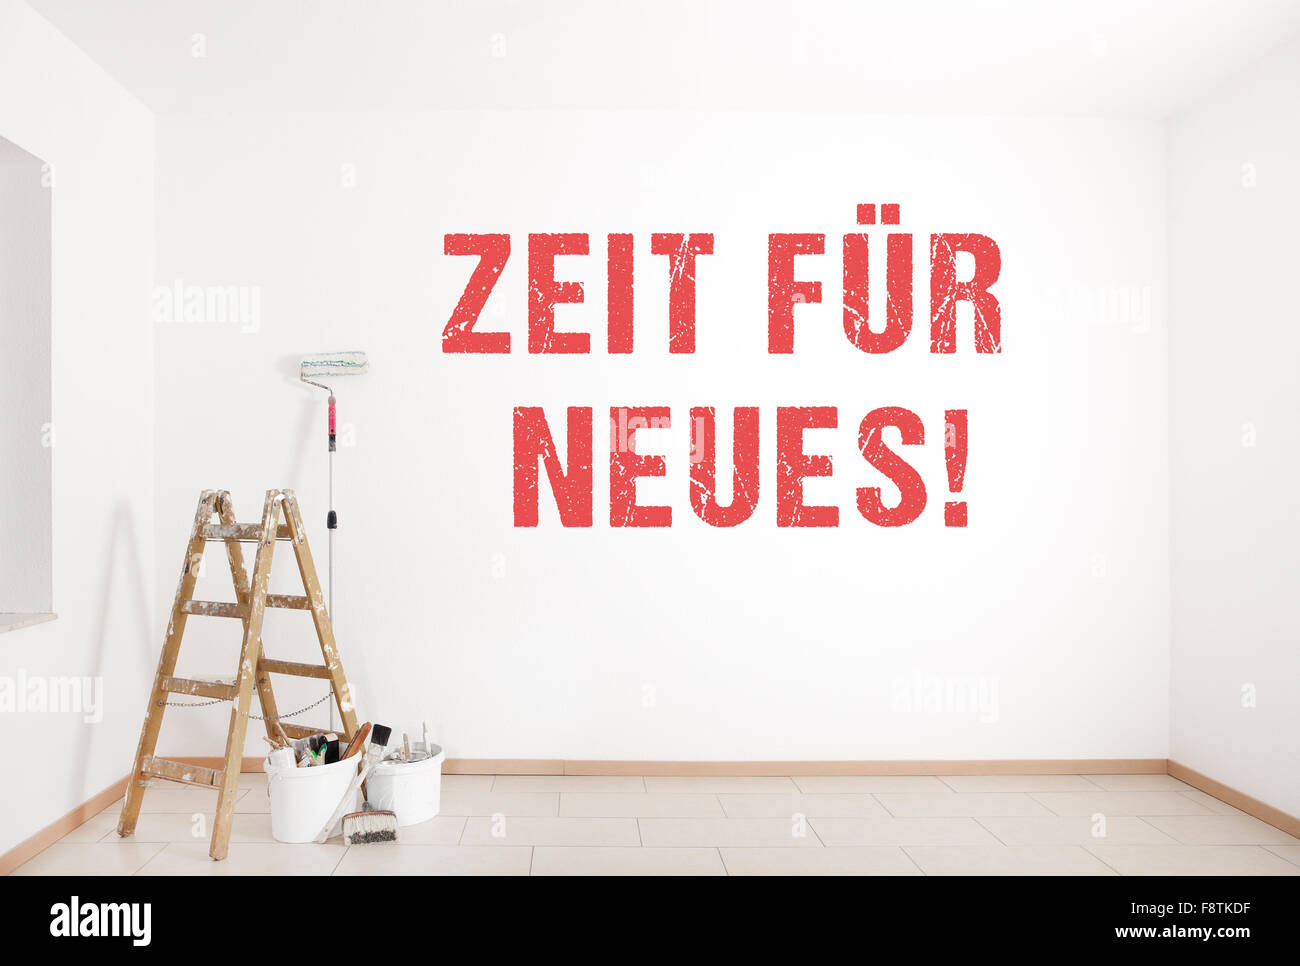 the text time for new service is painted on a wall with ladder and painting tools Stock Photo